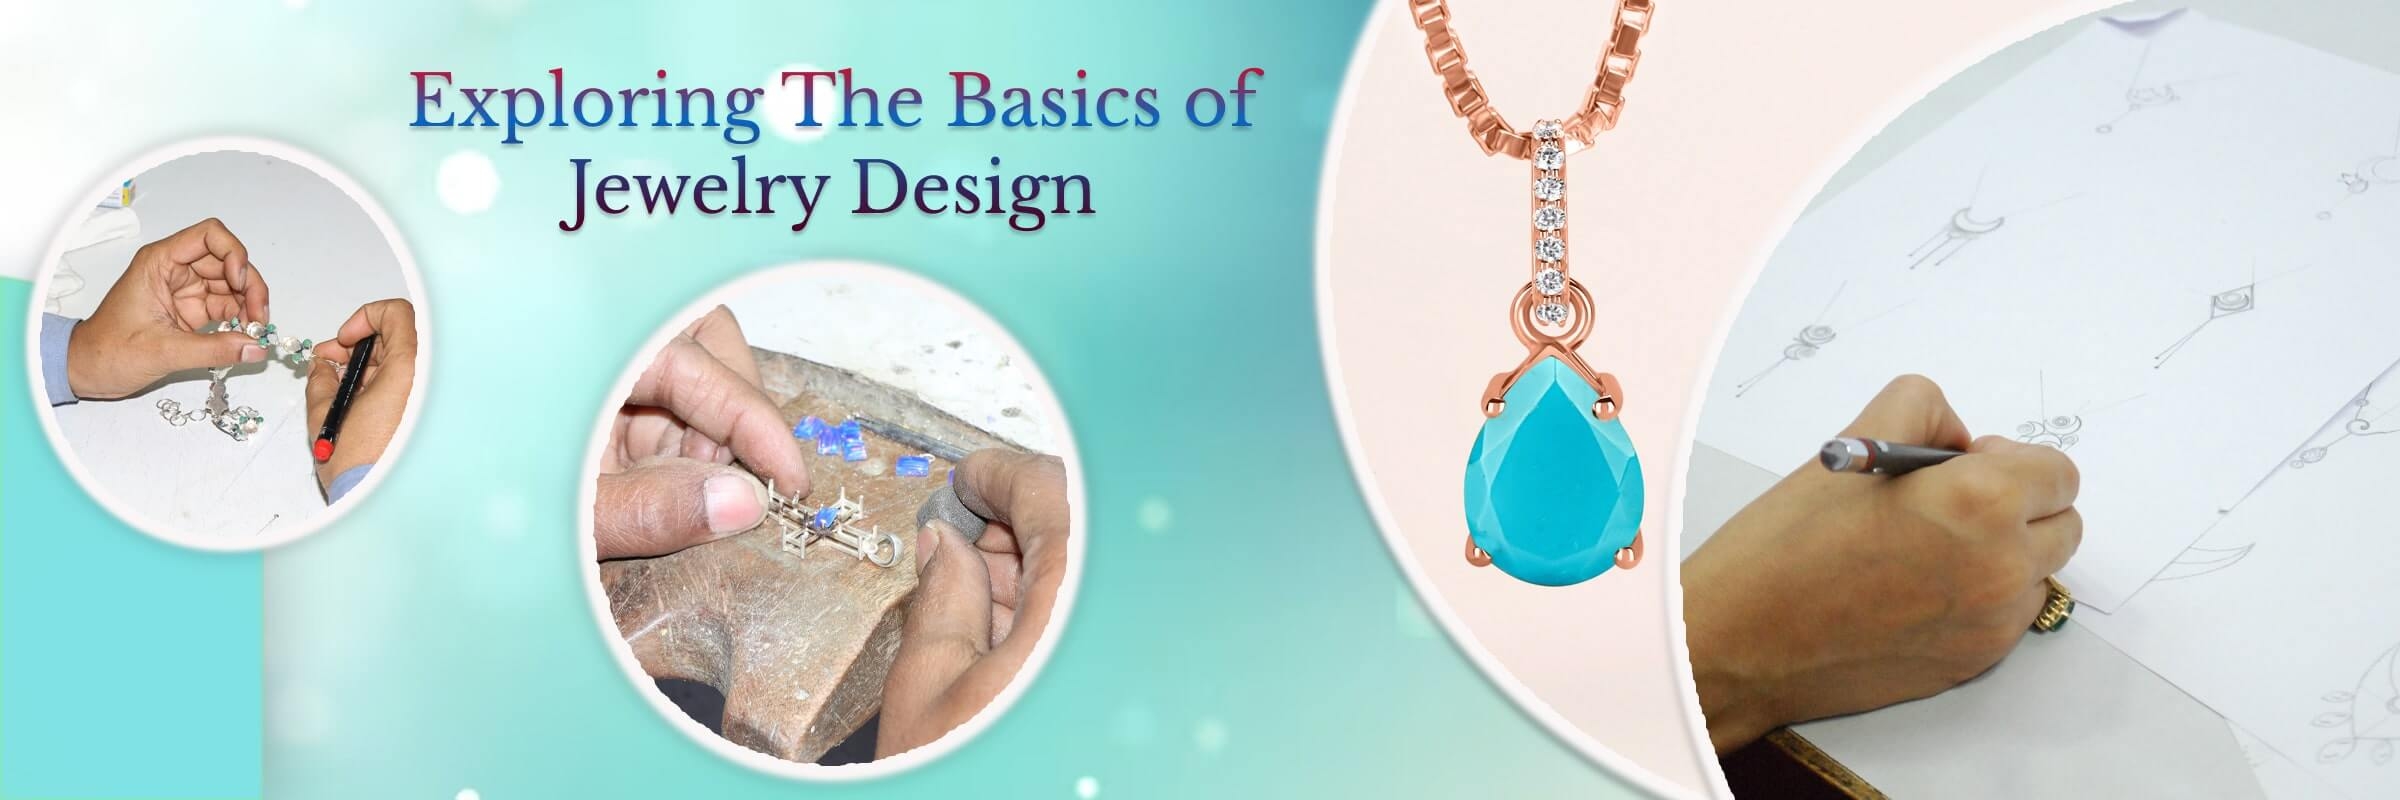 Basic Concepts of Sketching Jewelry Designs